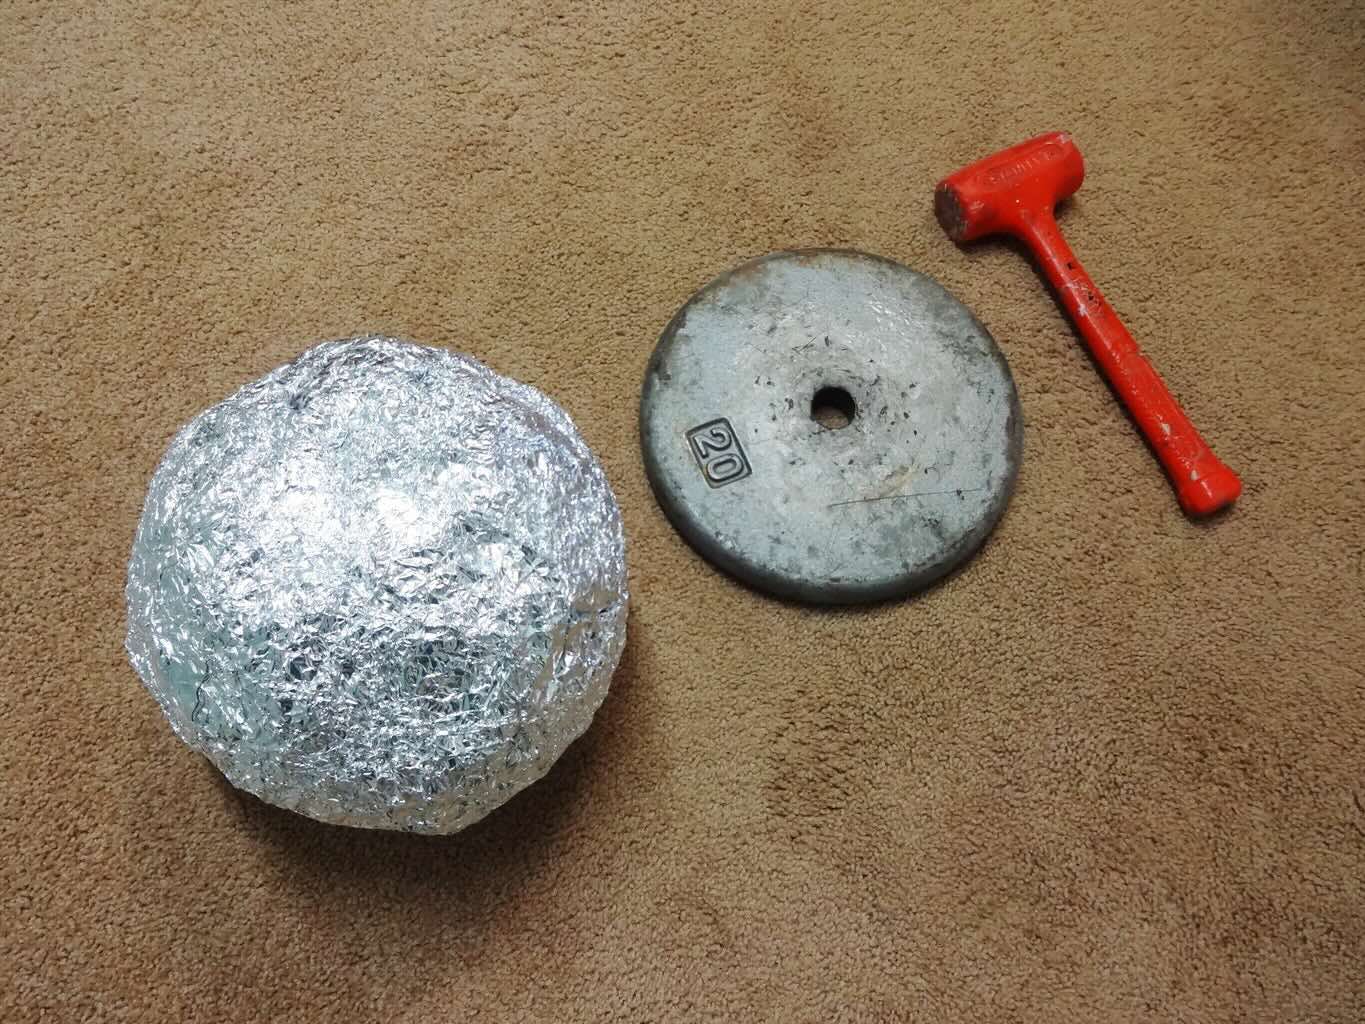 How To Make An Aluminum Foil Ball Without Sandpaper